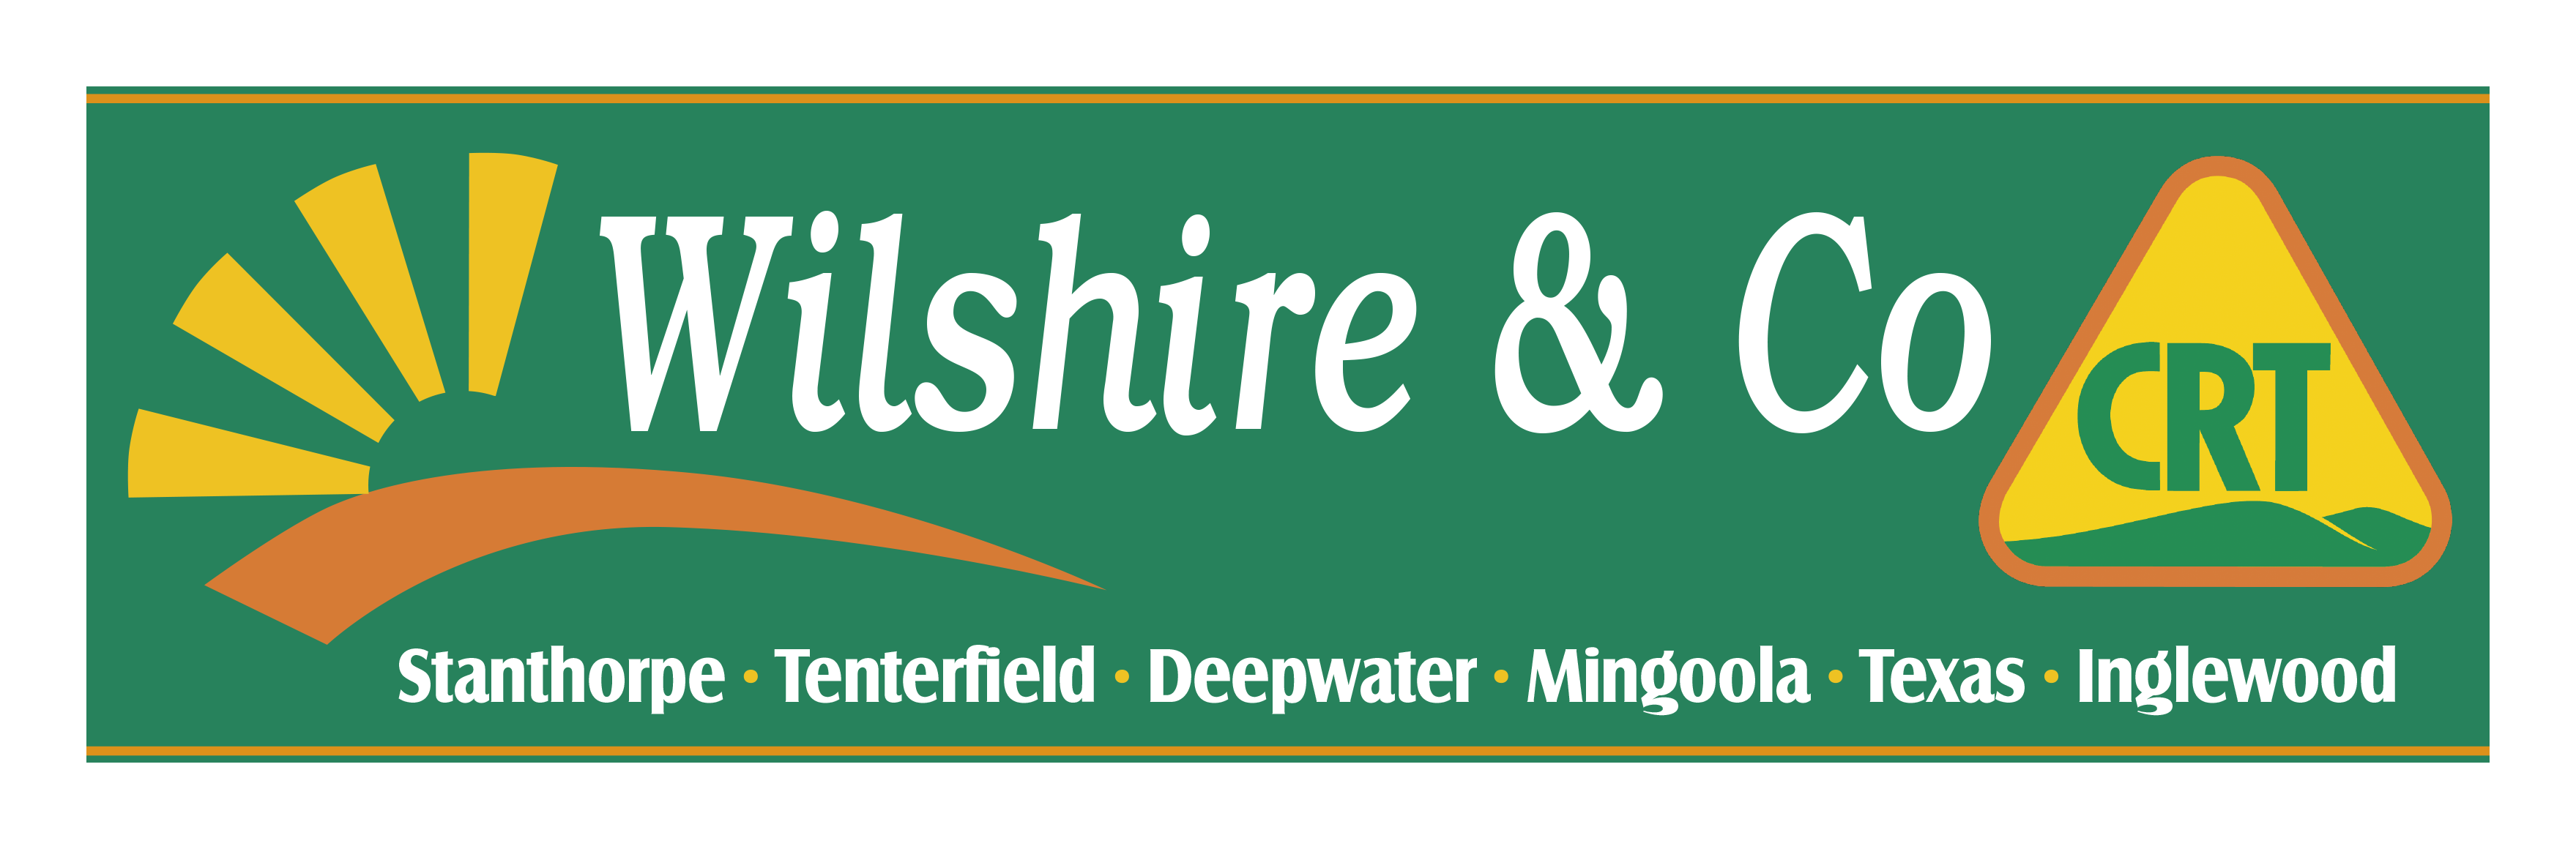 Find out more about Wilshire & Co Deepwater - Rural Produce, Animal Health, Hardware & Small Engines in Deepwater.